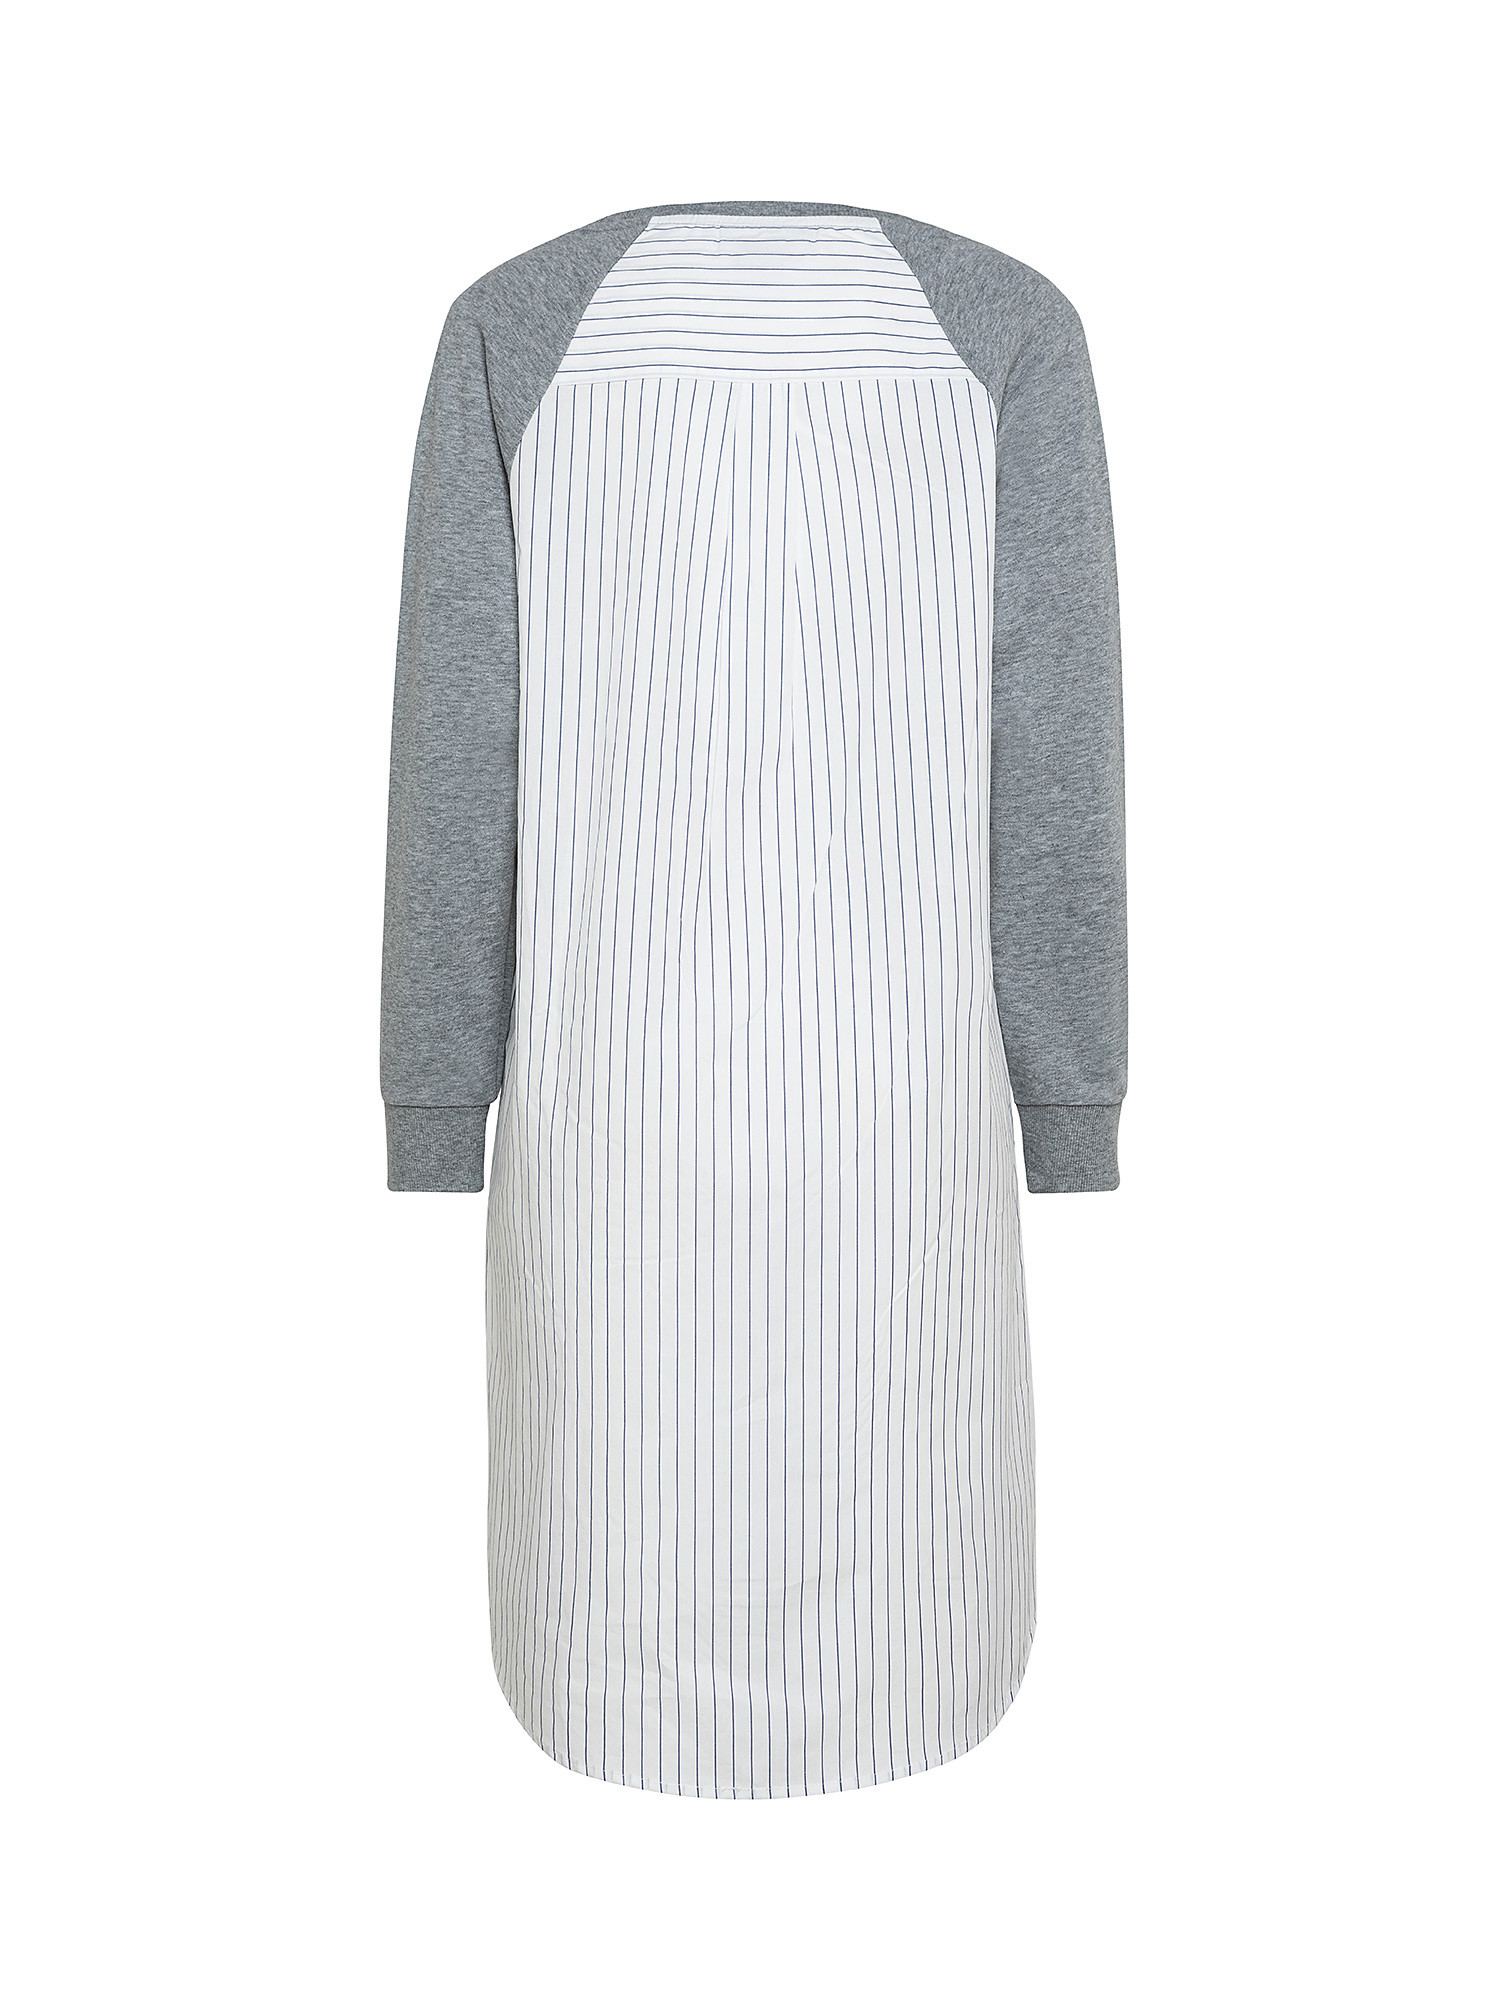 Knitted dress, Grey, large image number 1